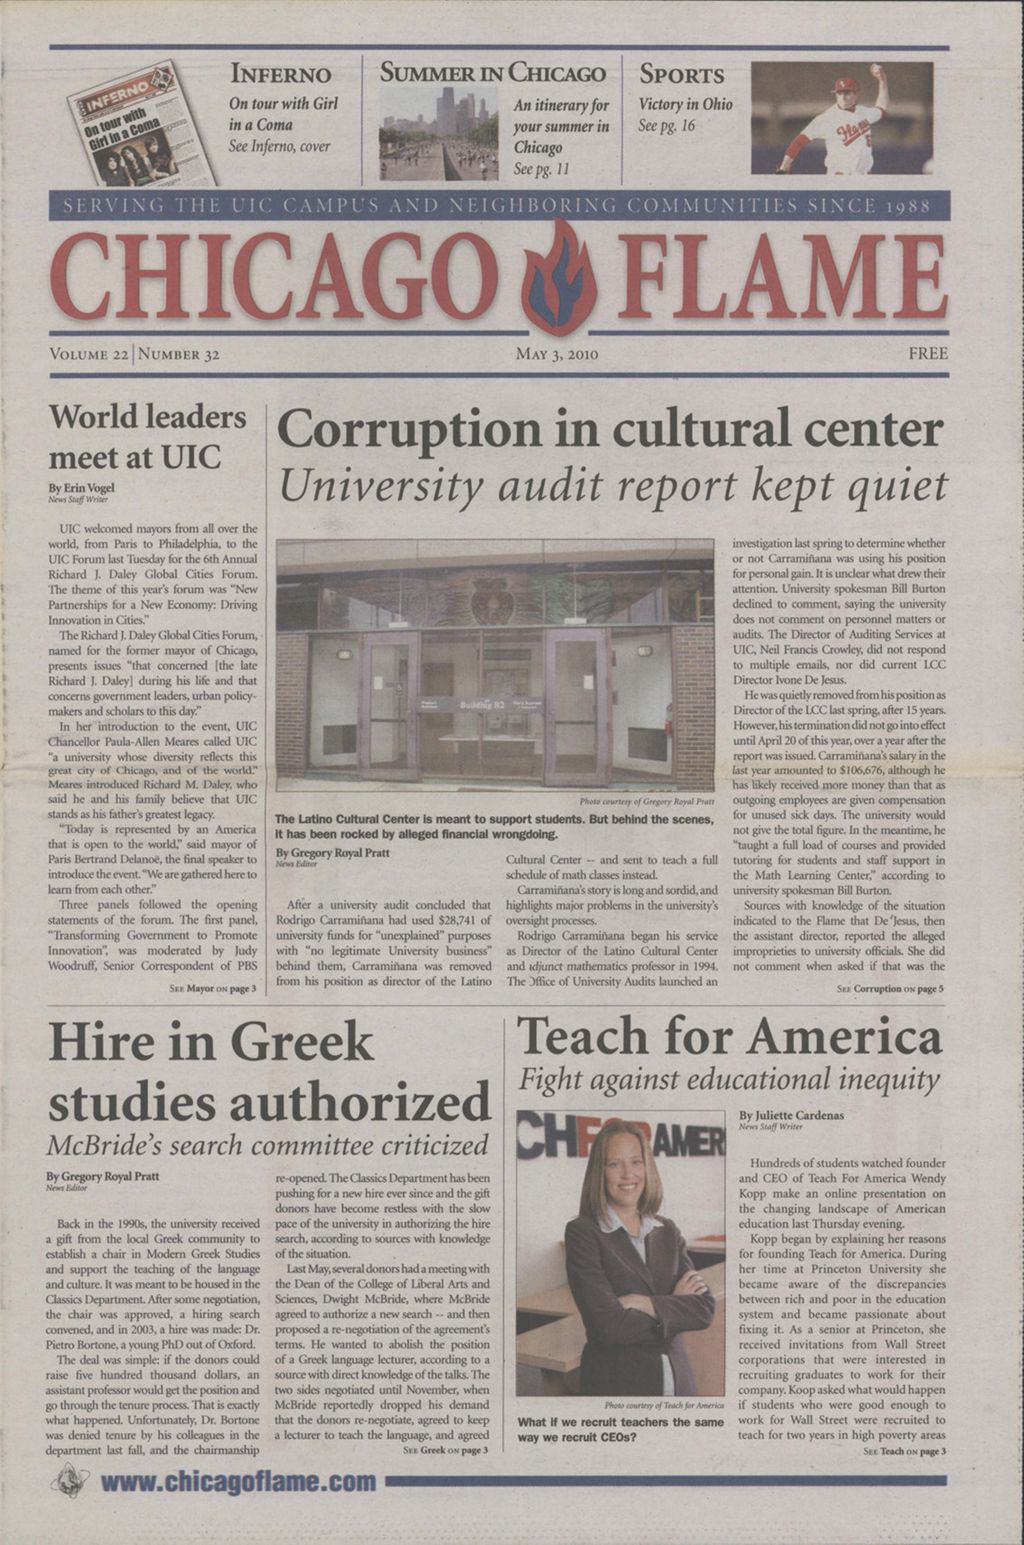 Miniature of Chicago Flame (May 3, 2010)